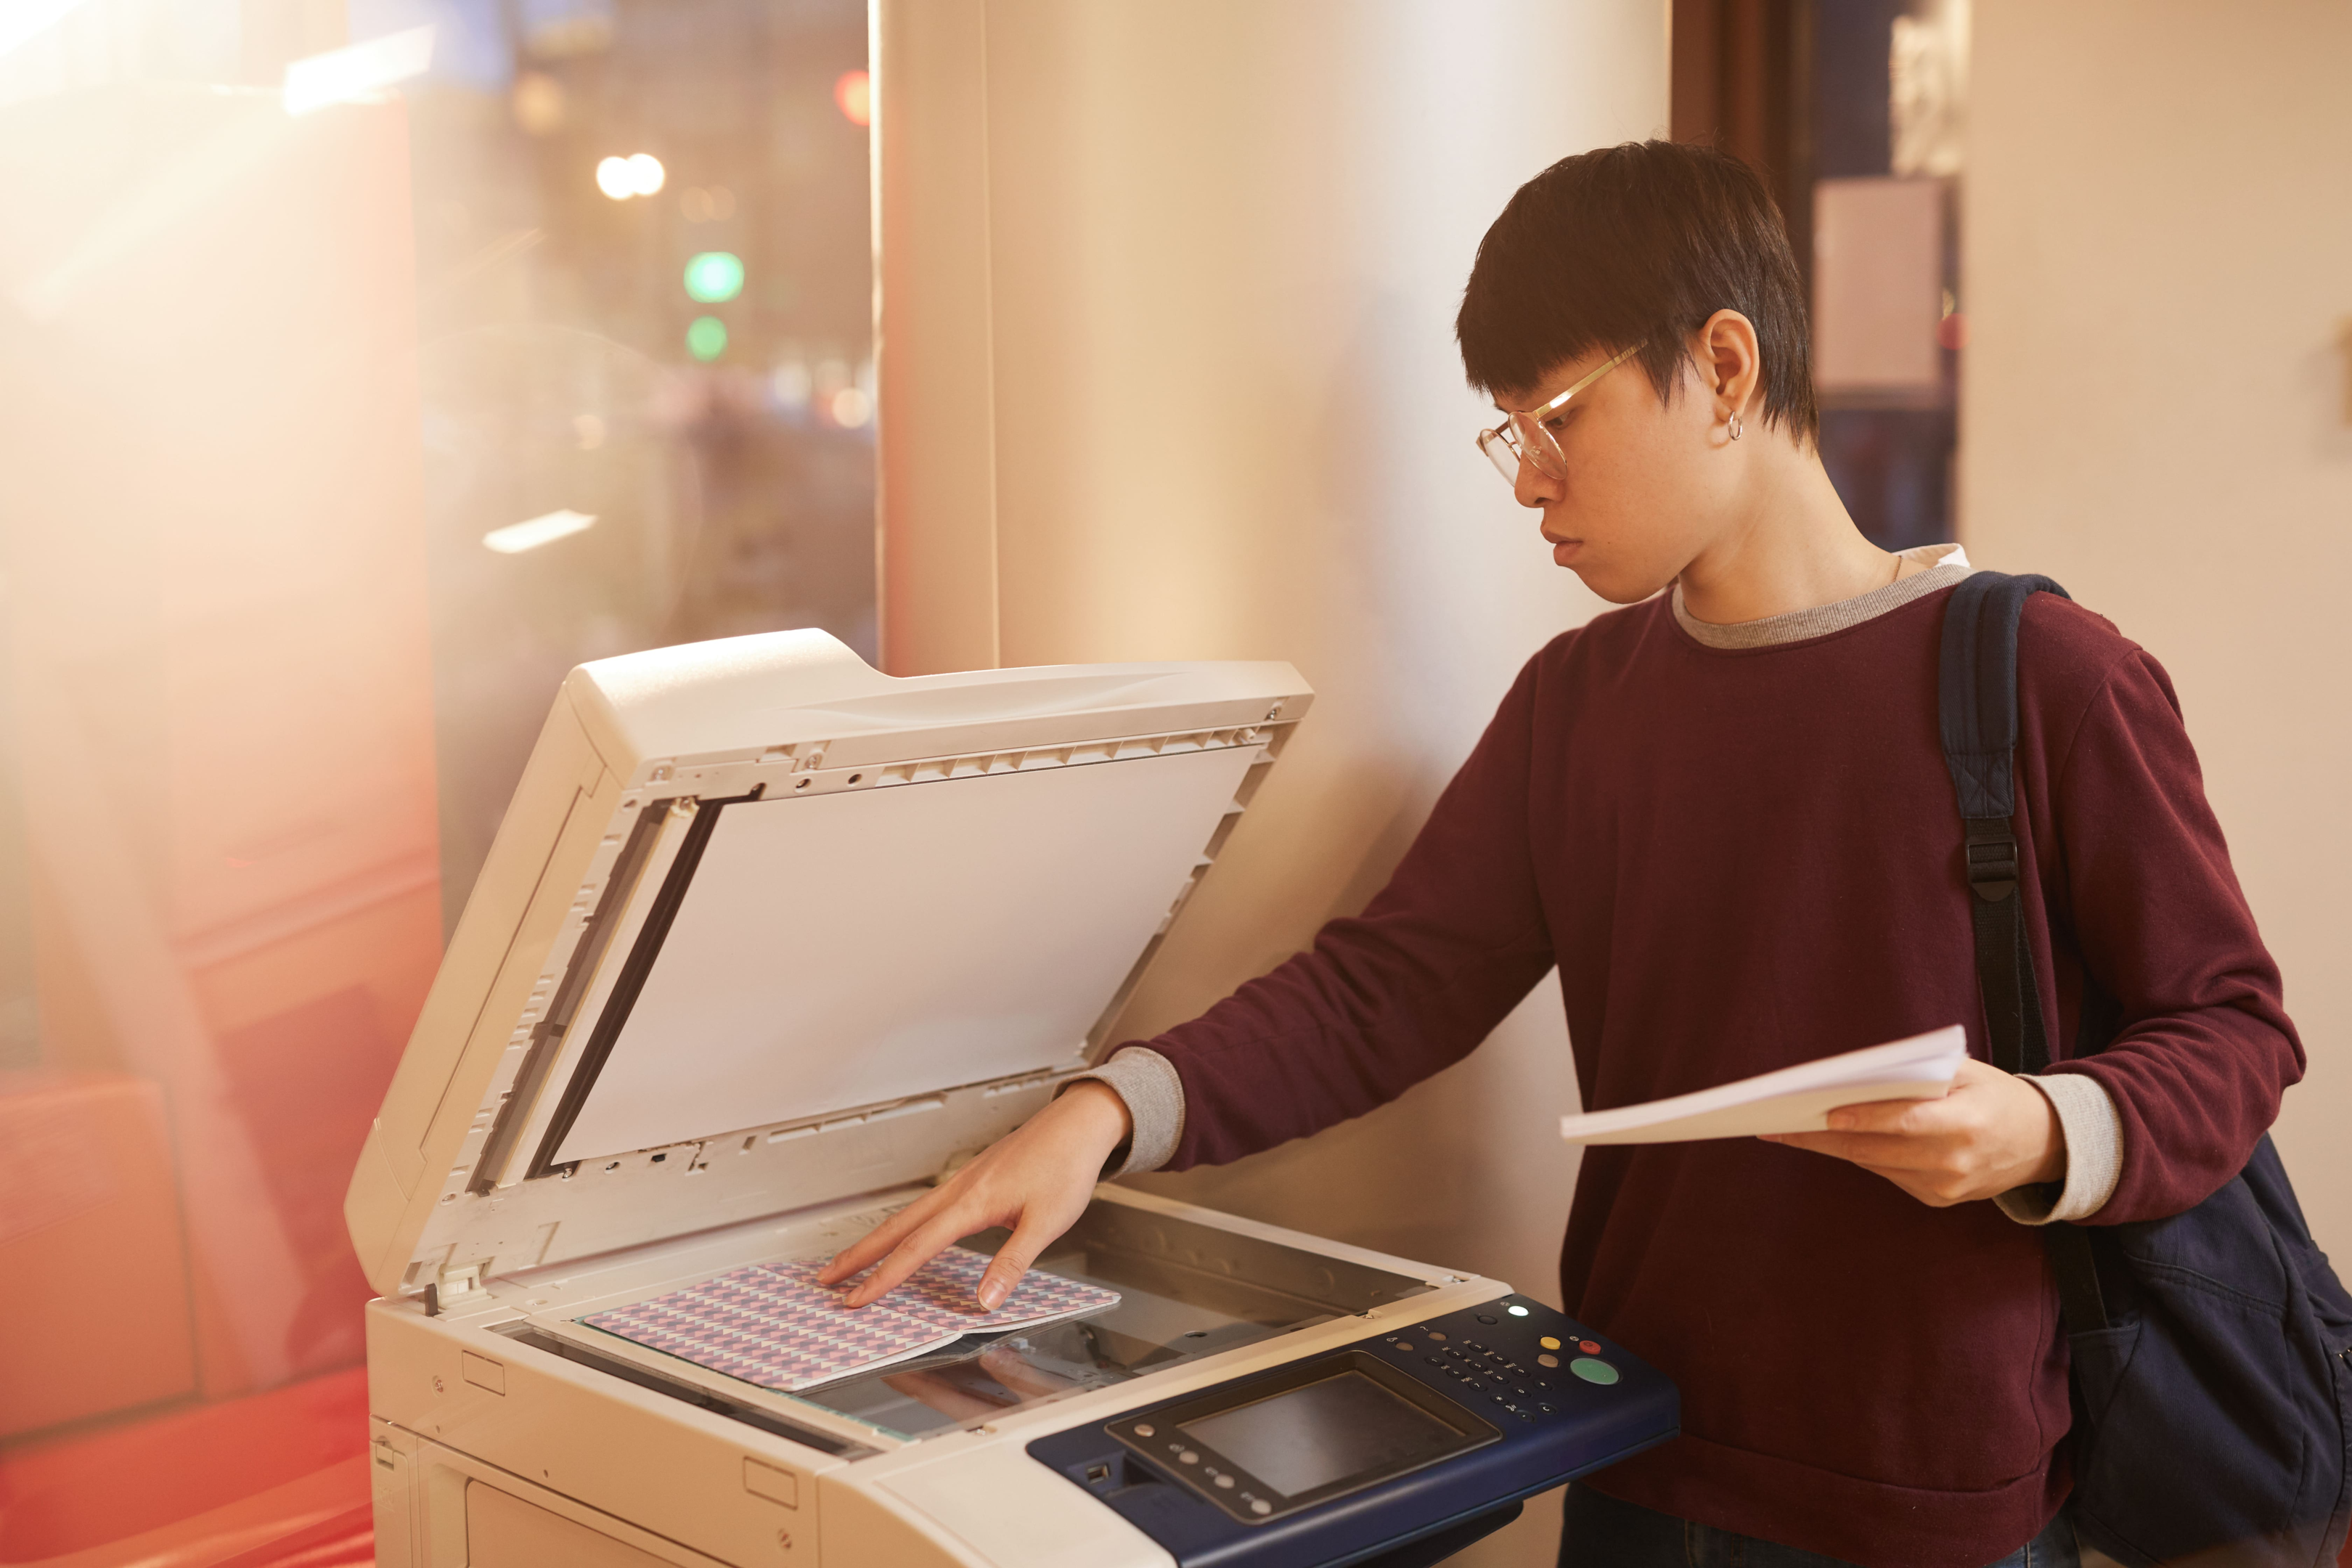 Is it cheaper to buy a refurbished multifunction printer than a new photocopier?